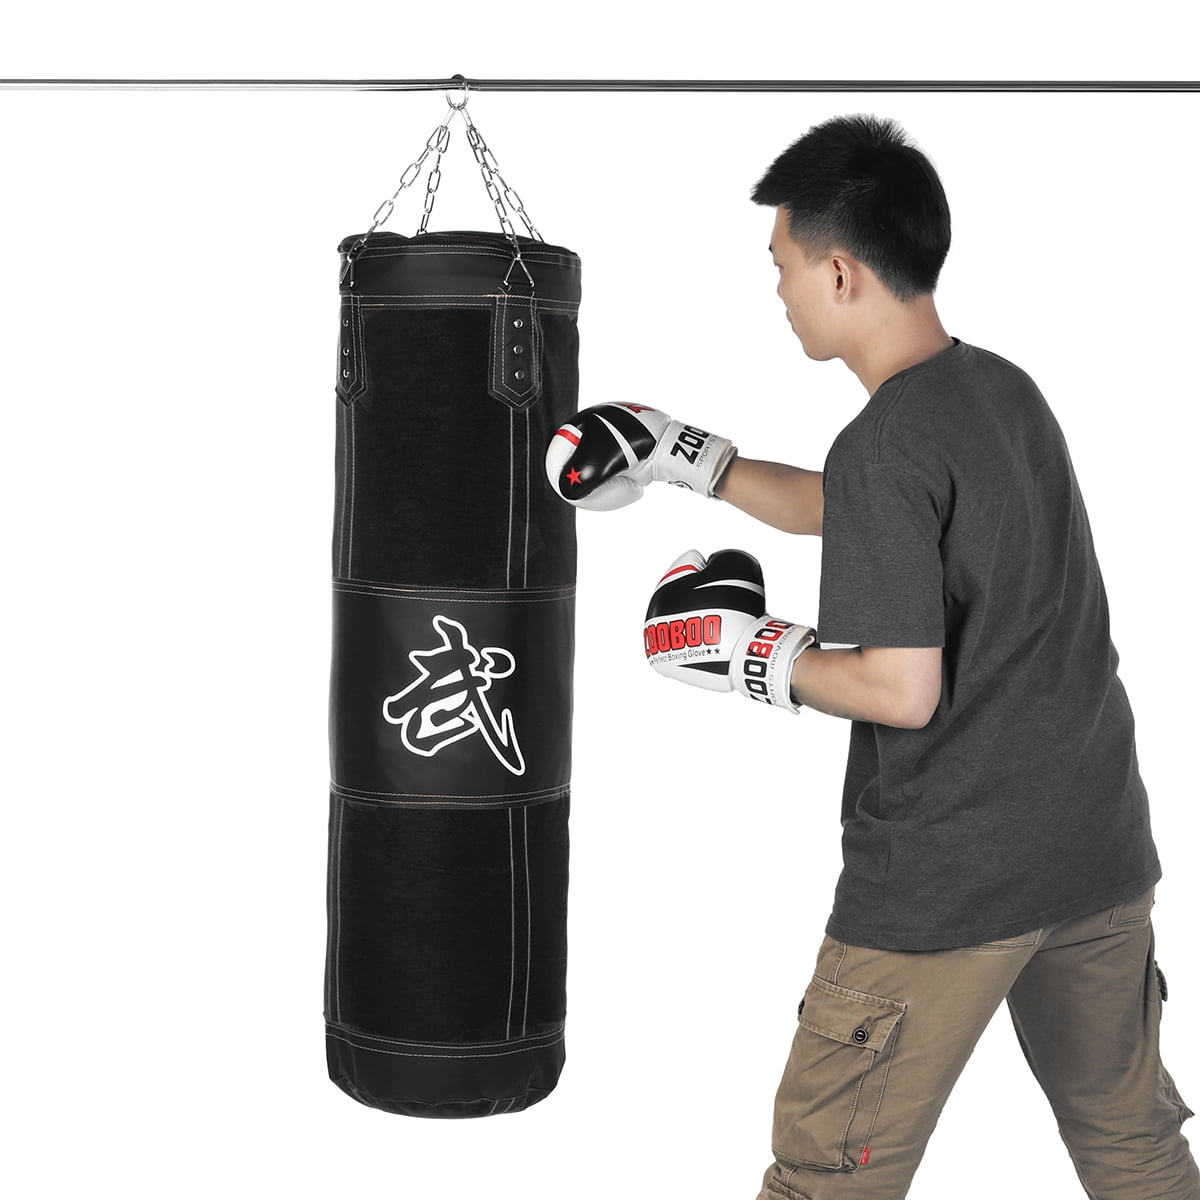 Punch bag Ceiling Hanging Hook Boxing Heavy Duty Powder Coated by Athletics Gear 